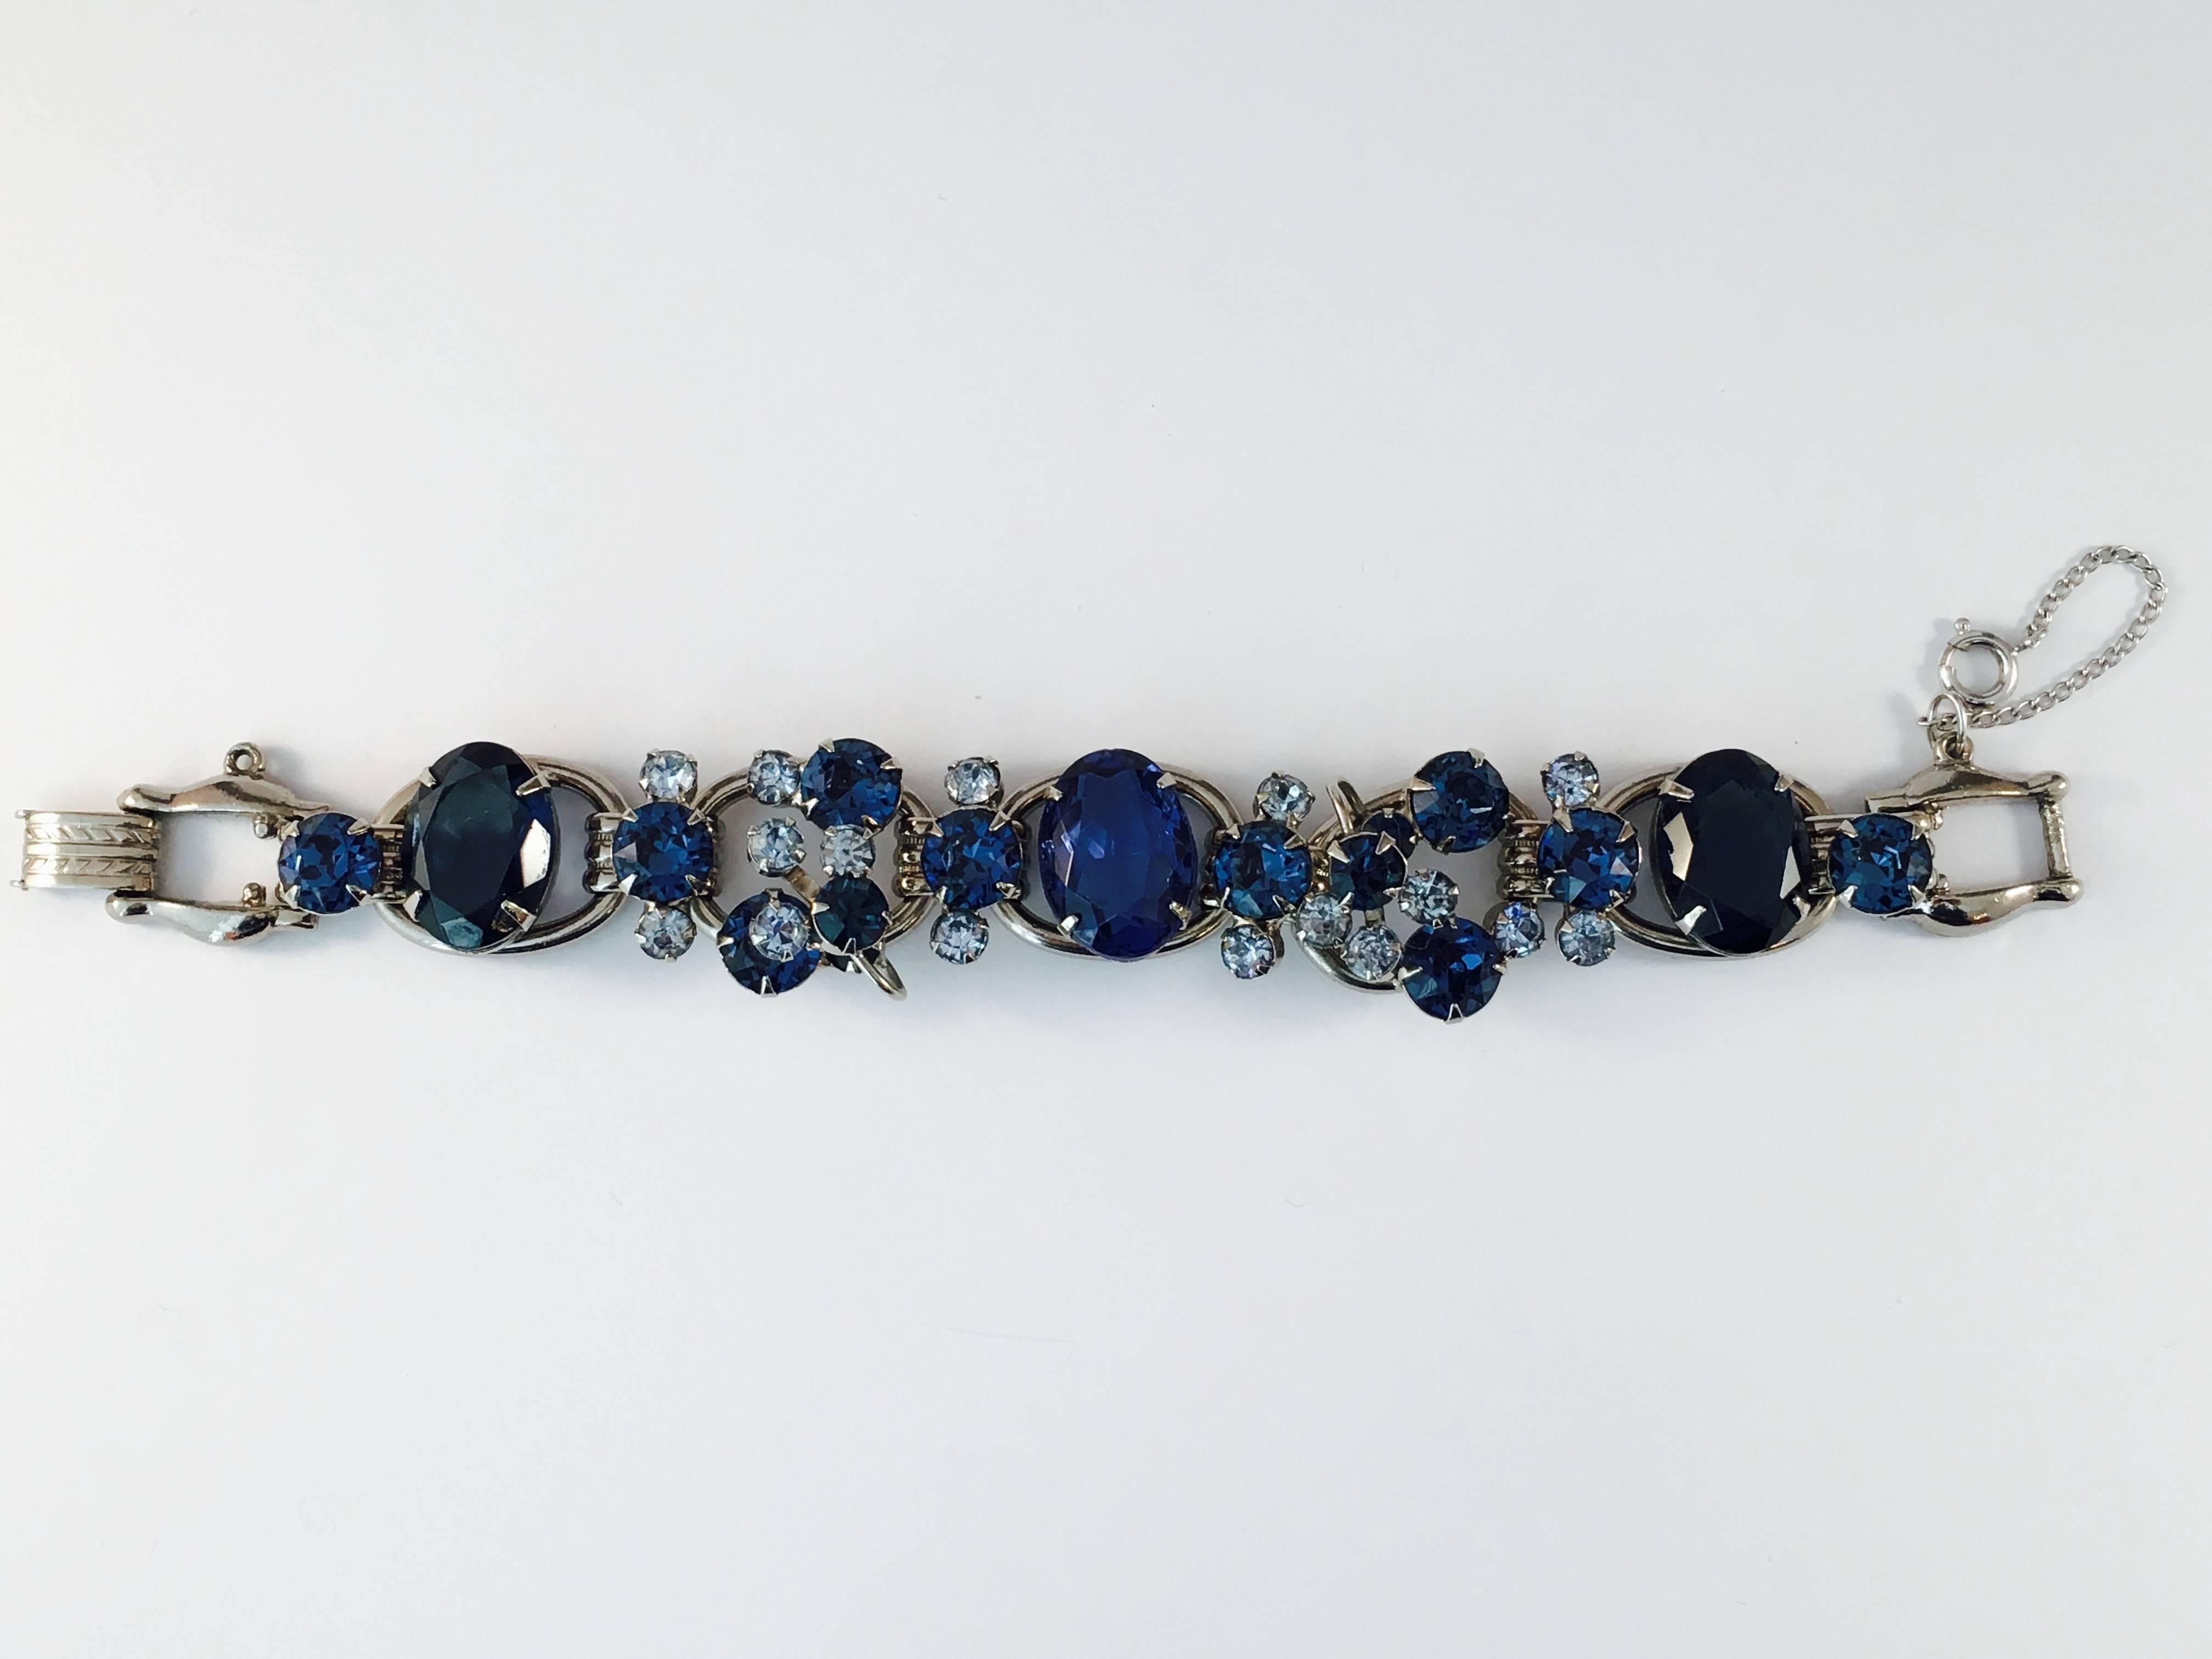 1960s Juliana Blue Rhinestone Bracelet In Excellent Condition For Sale In Chicago, IL